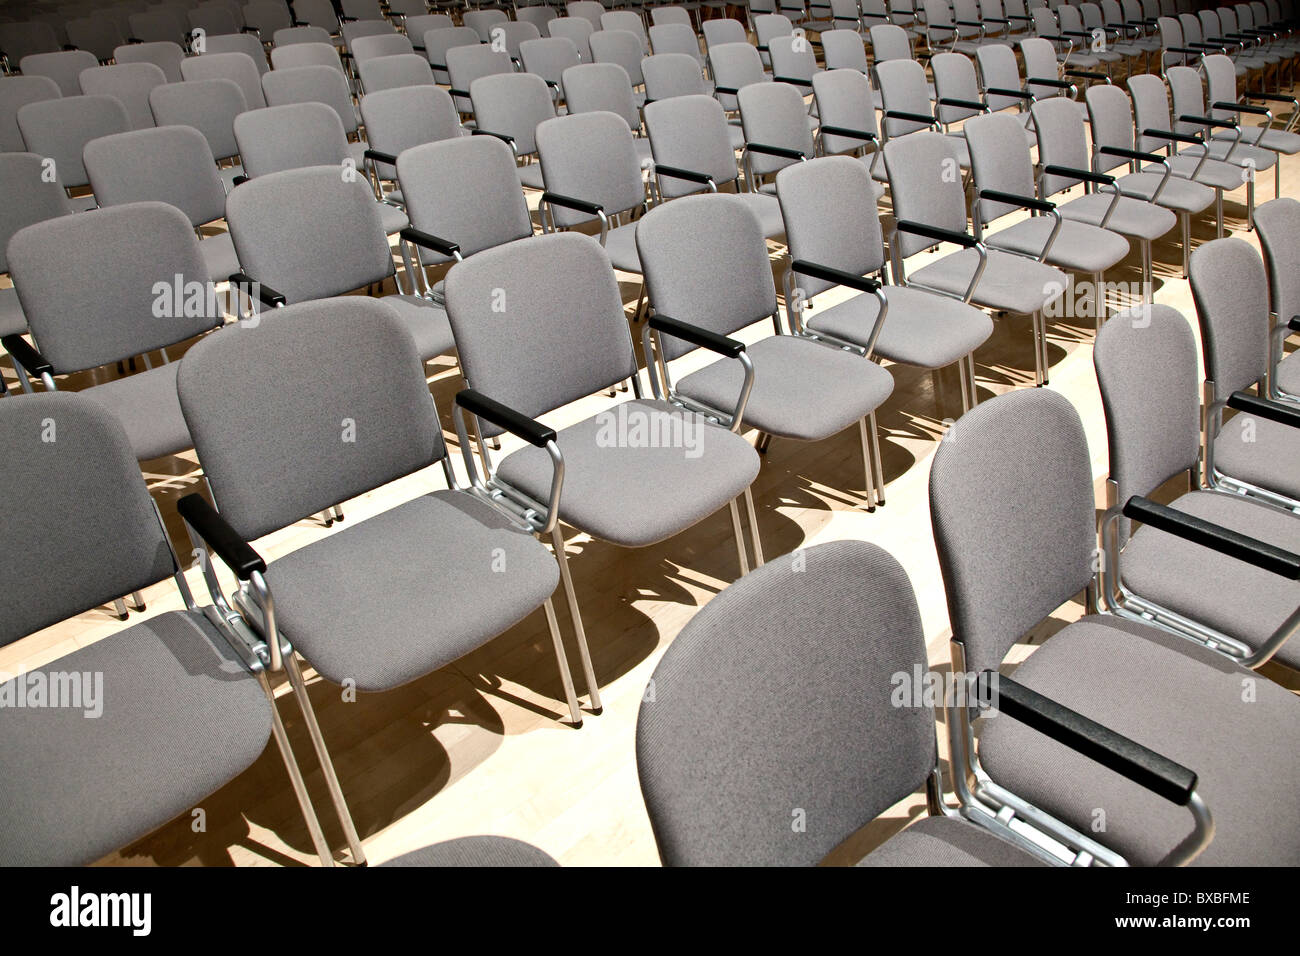 Rows of chairs Stock Photo